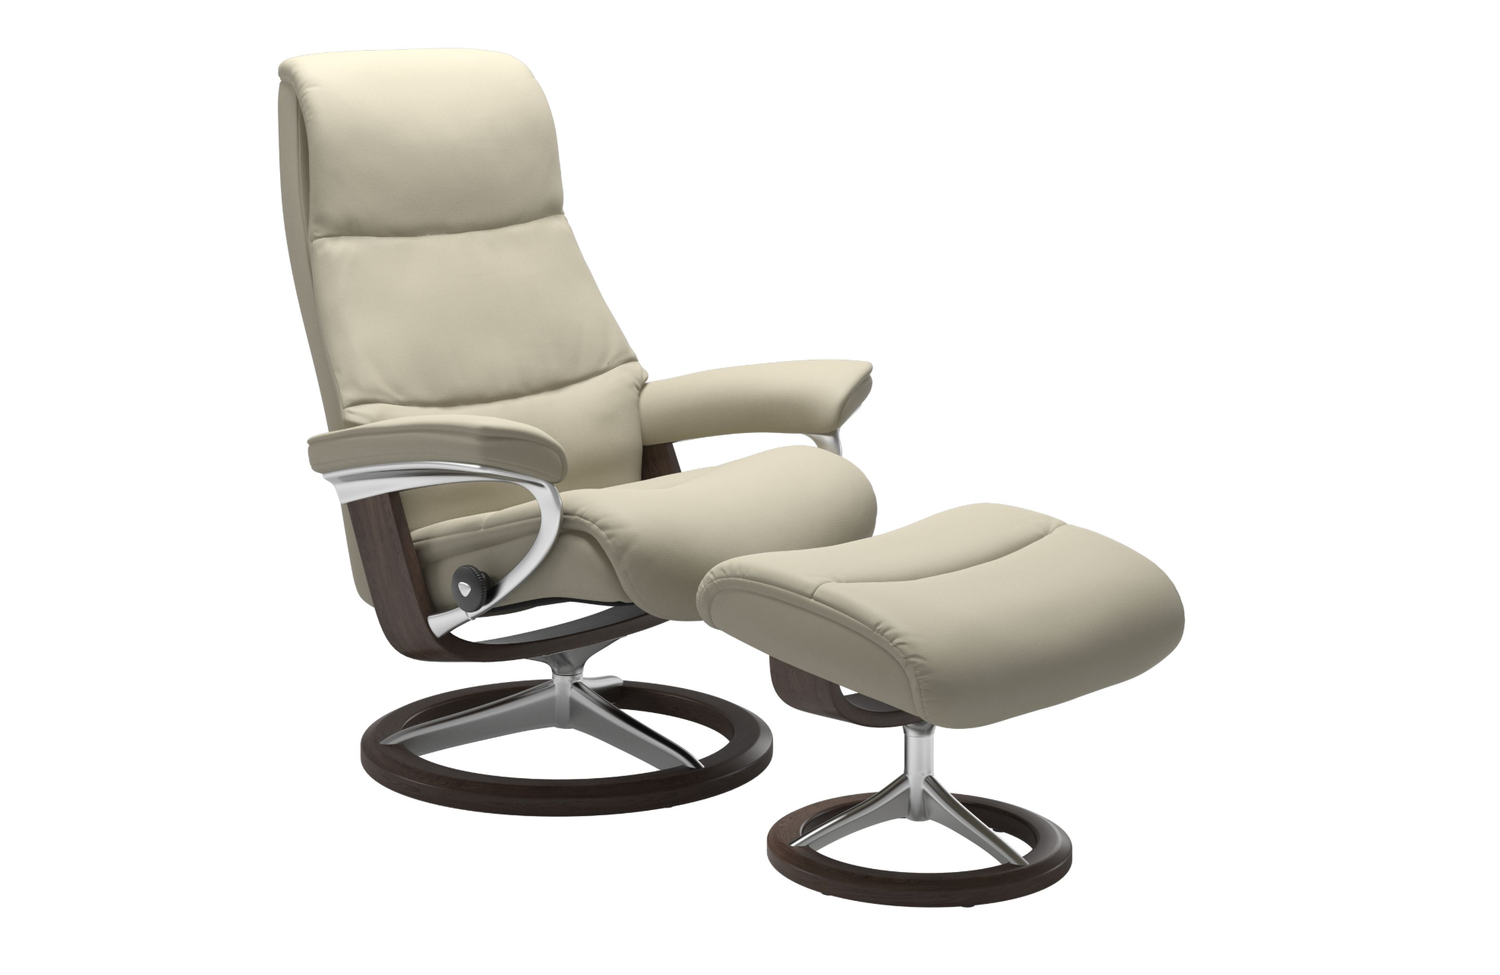 Stressless View – Recliners SL